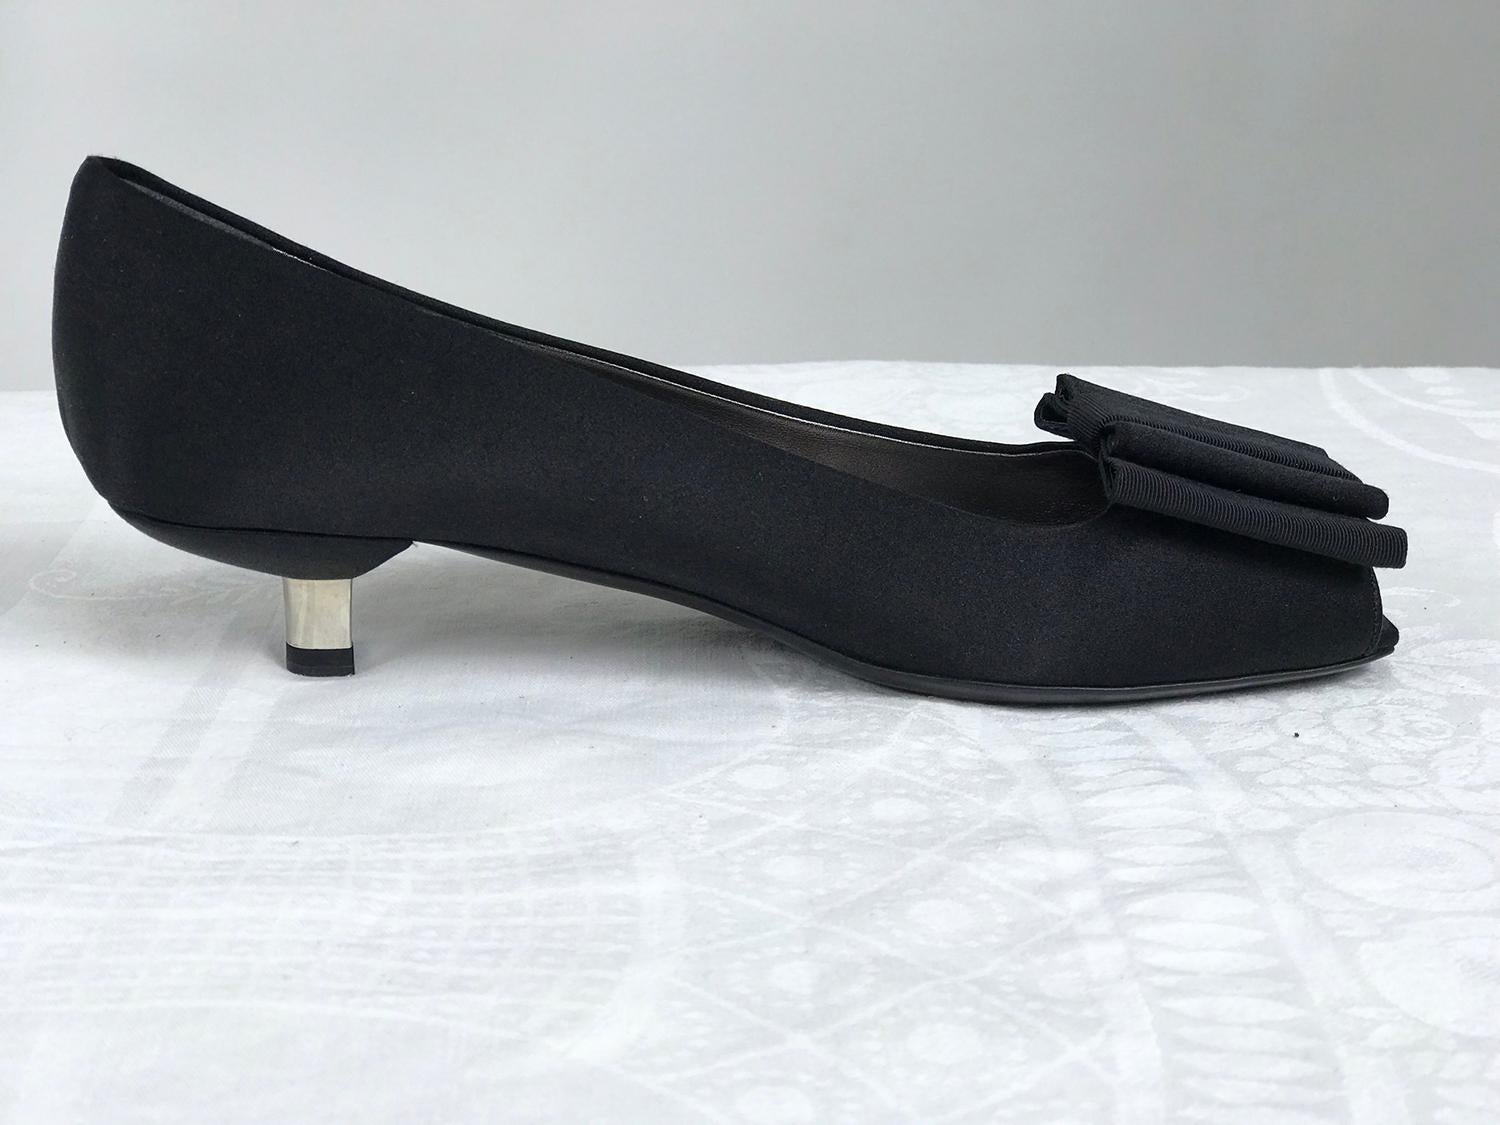 Prada black satin open toe bow front, low silver metal heel pump, 37. 1 1/4 inch heel. These amazing shoes have never been worn. The front has a large gros grain and satin bow with an open toe. The heel is low and shaped the upper is satin with a